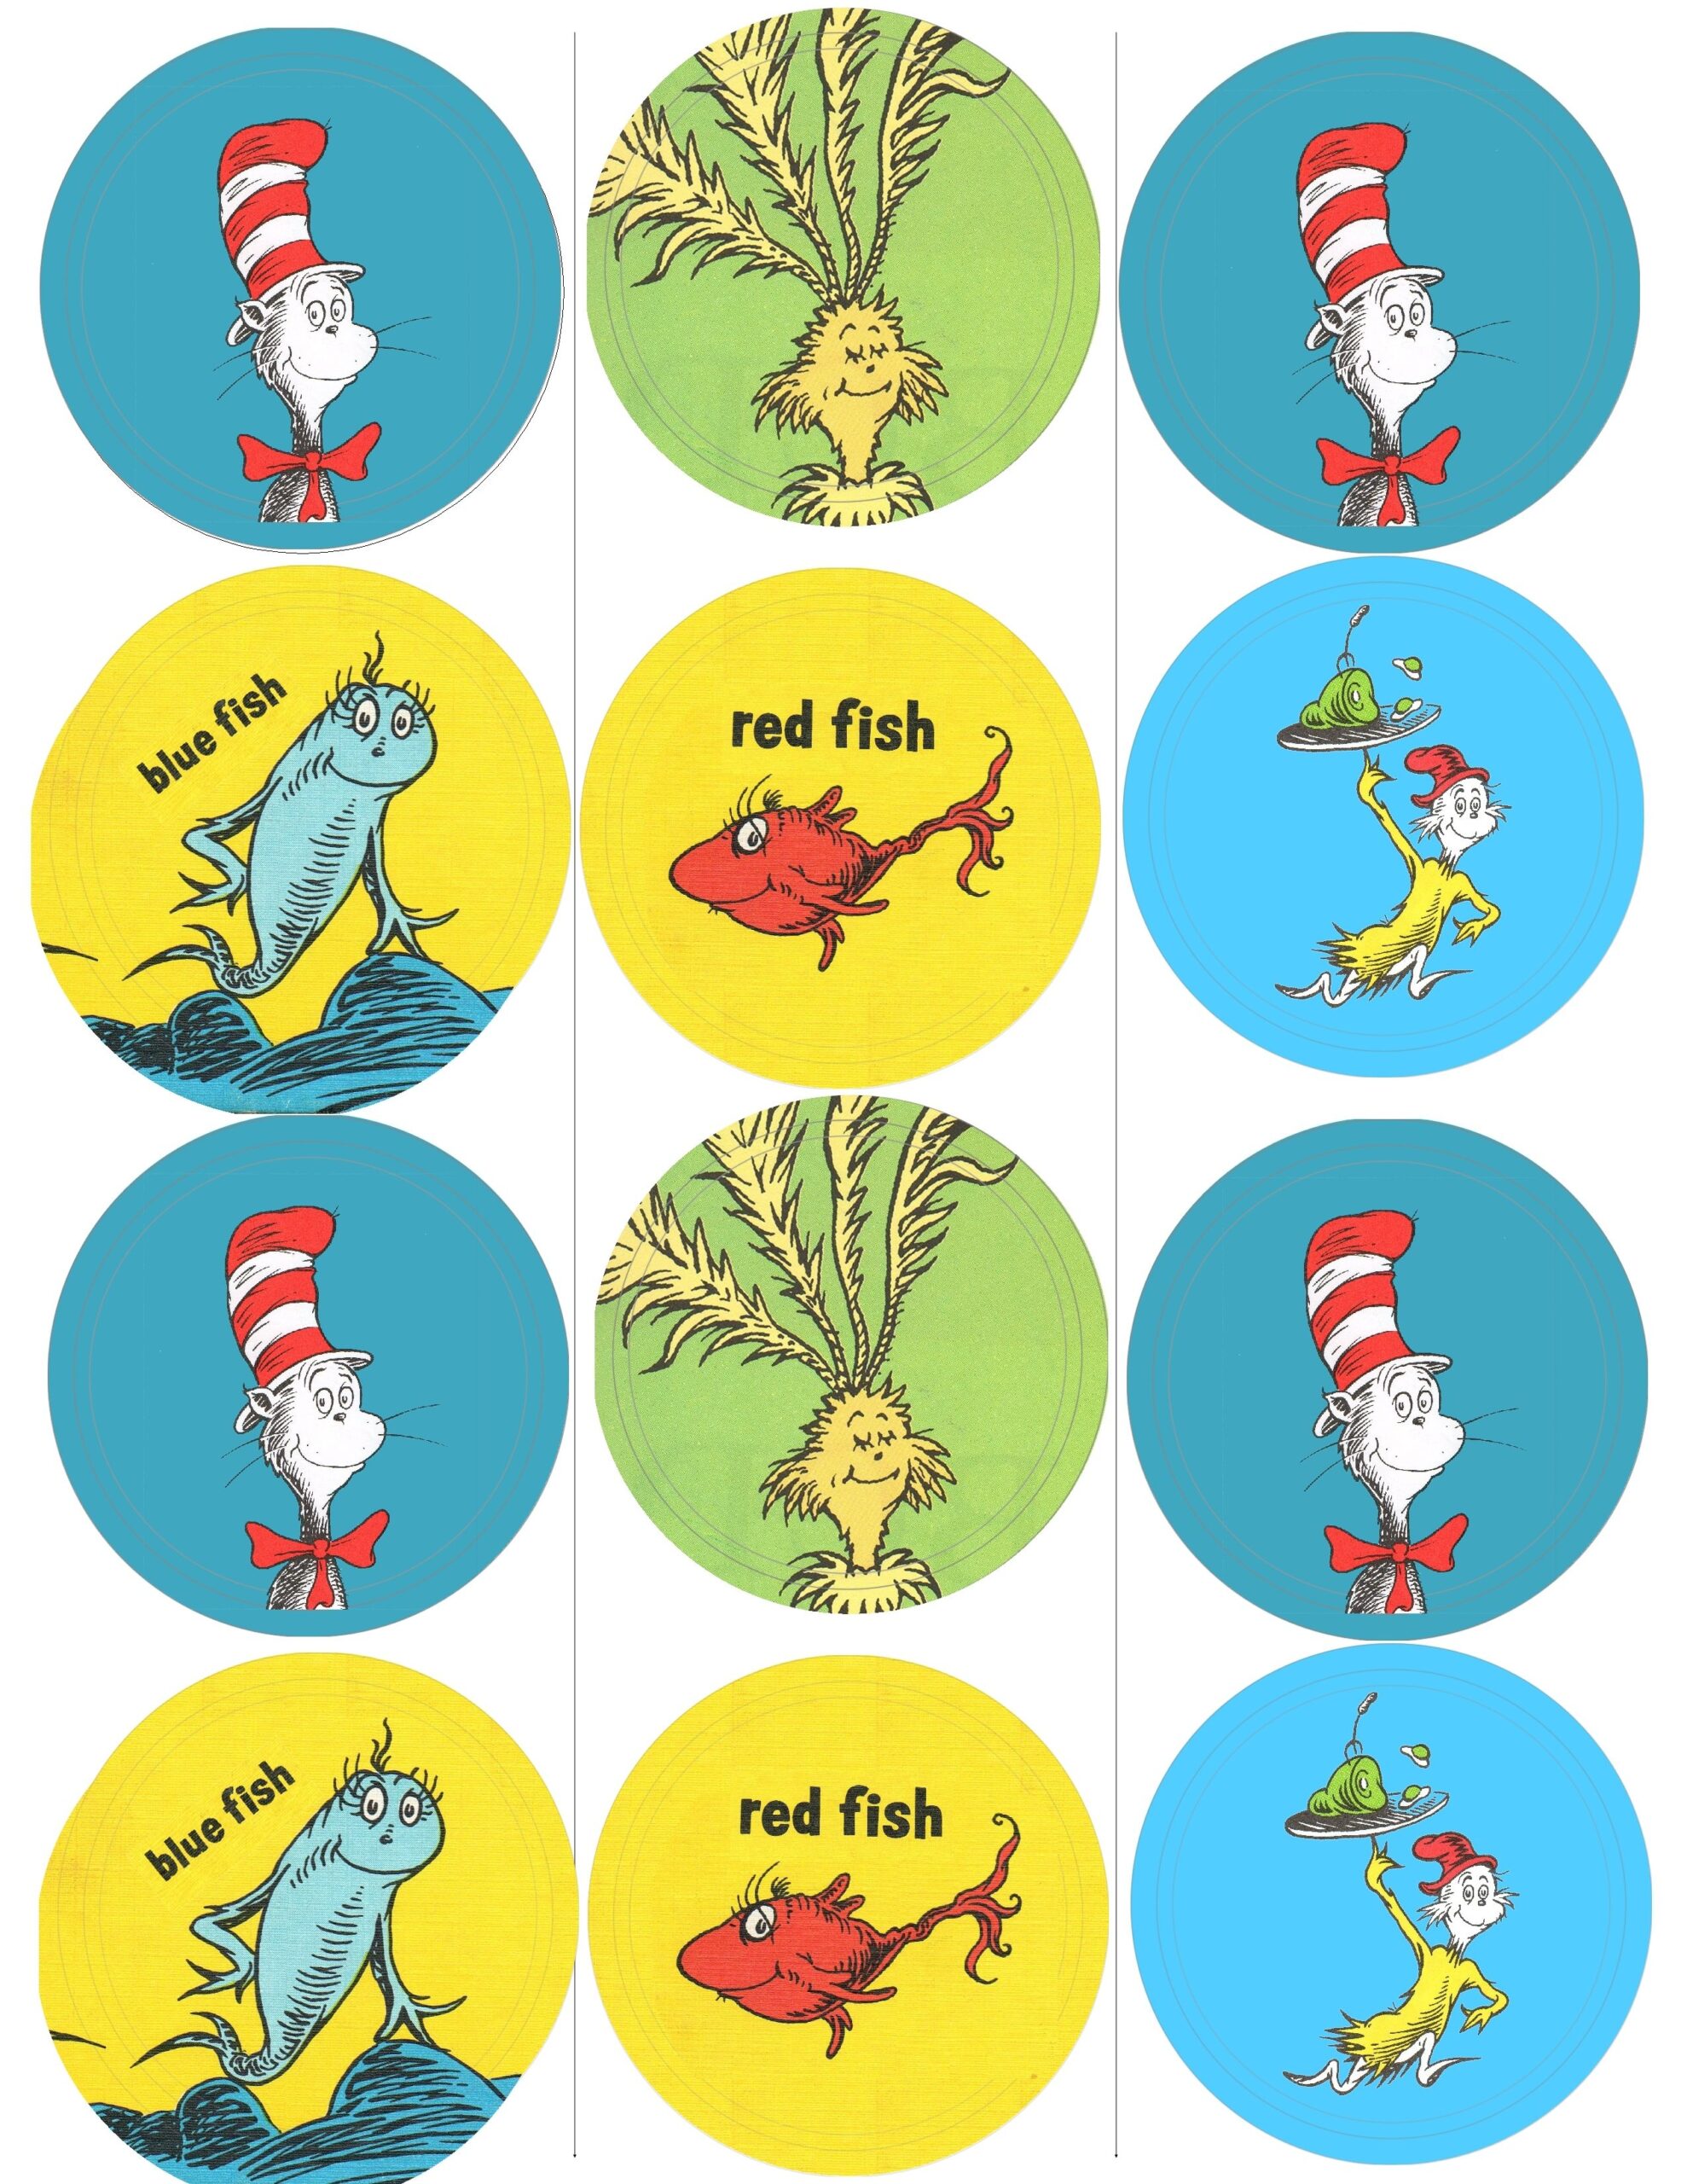 Can Be Used As A Template For Bottle Covers Or As The Covers Themselves I Used Dr Seuss Scrapb Dr Seuss Cupcake Toppers Dr Seuss Birthday Party Dr Seuss Day